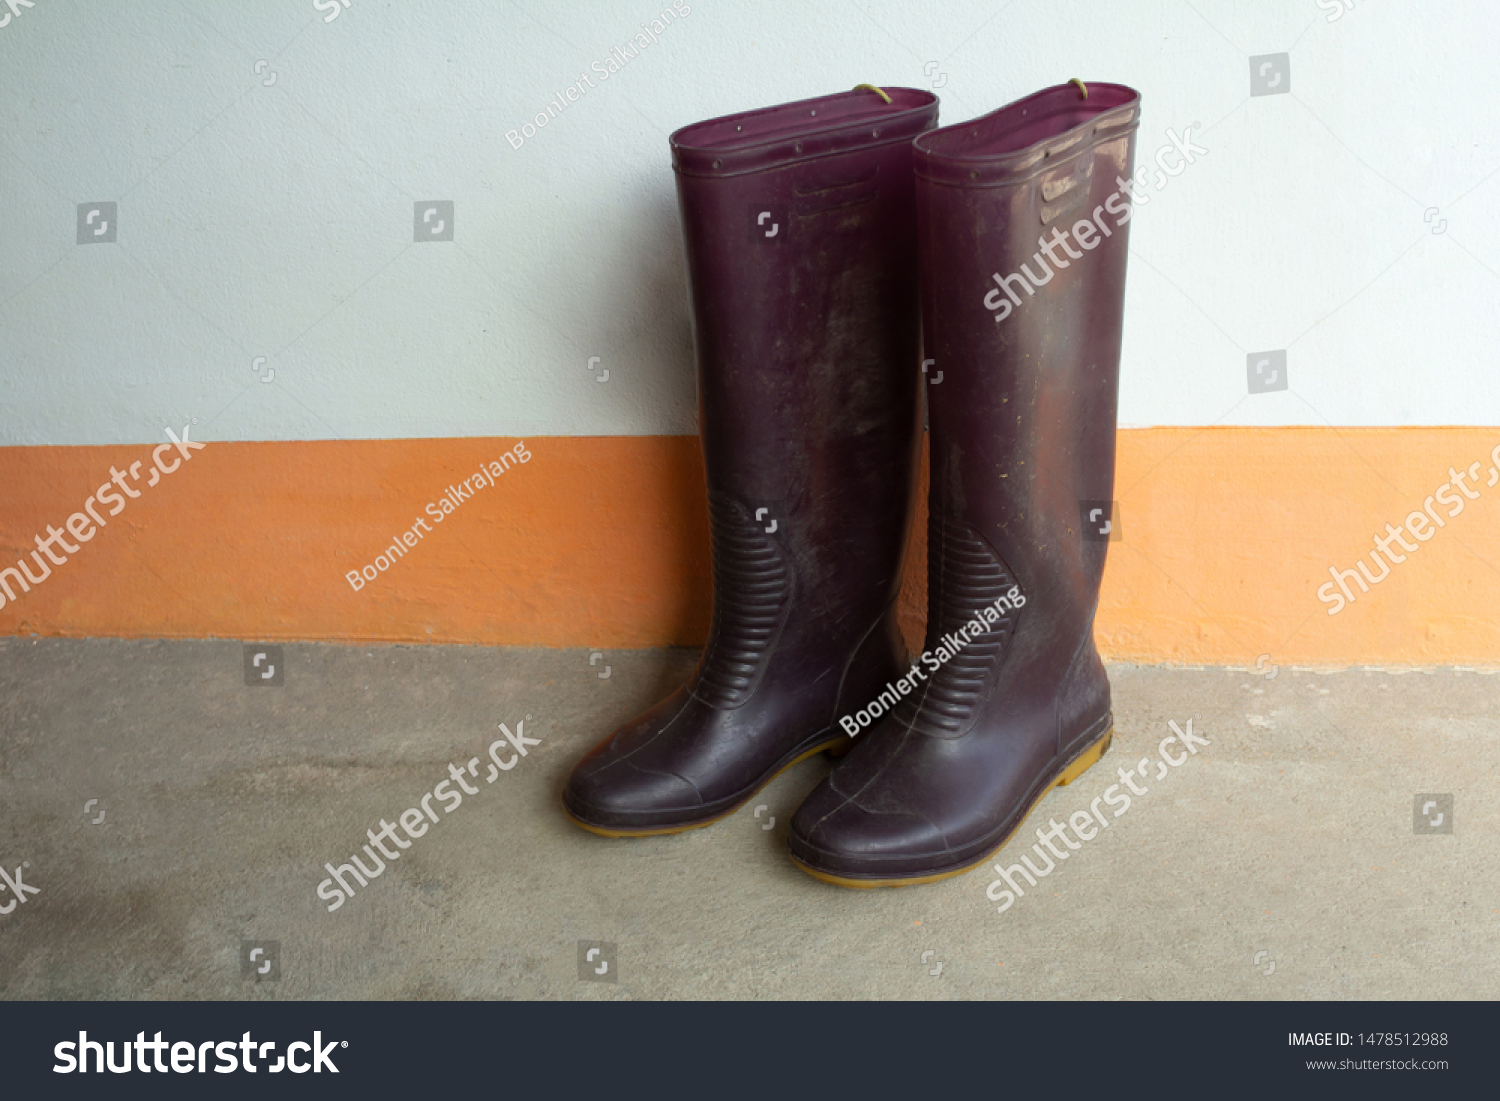 one rubber boots